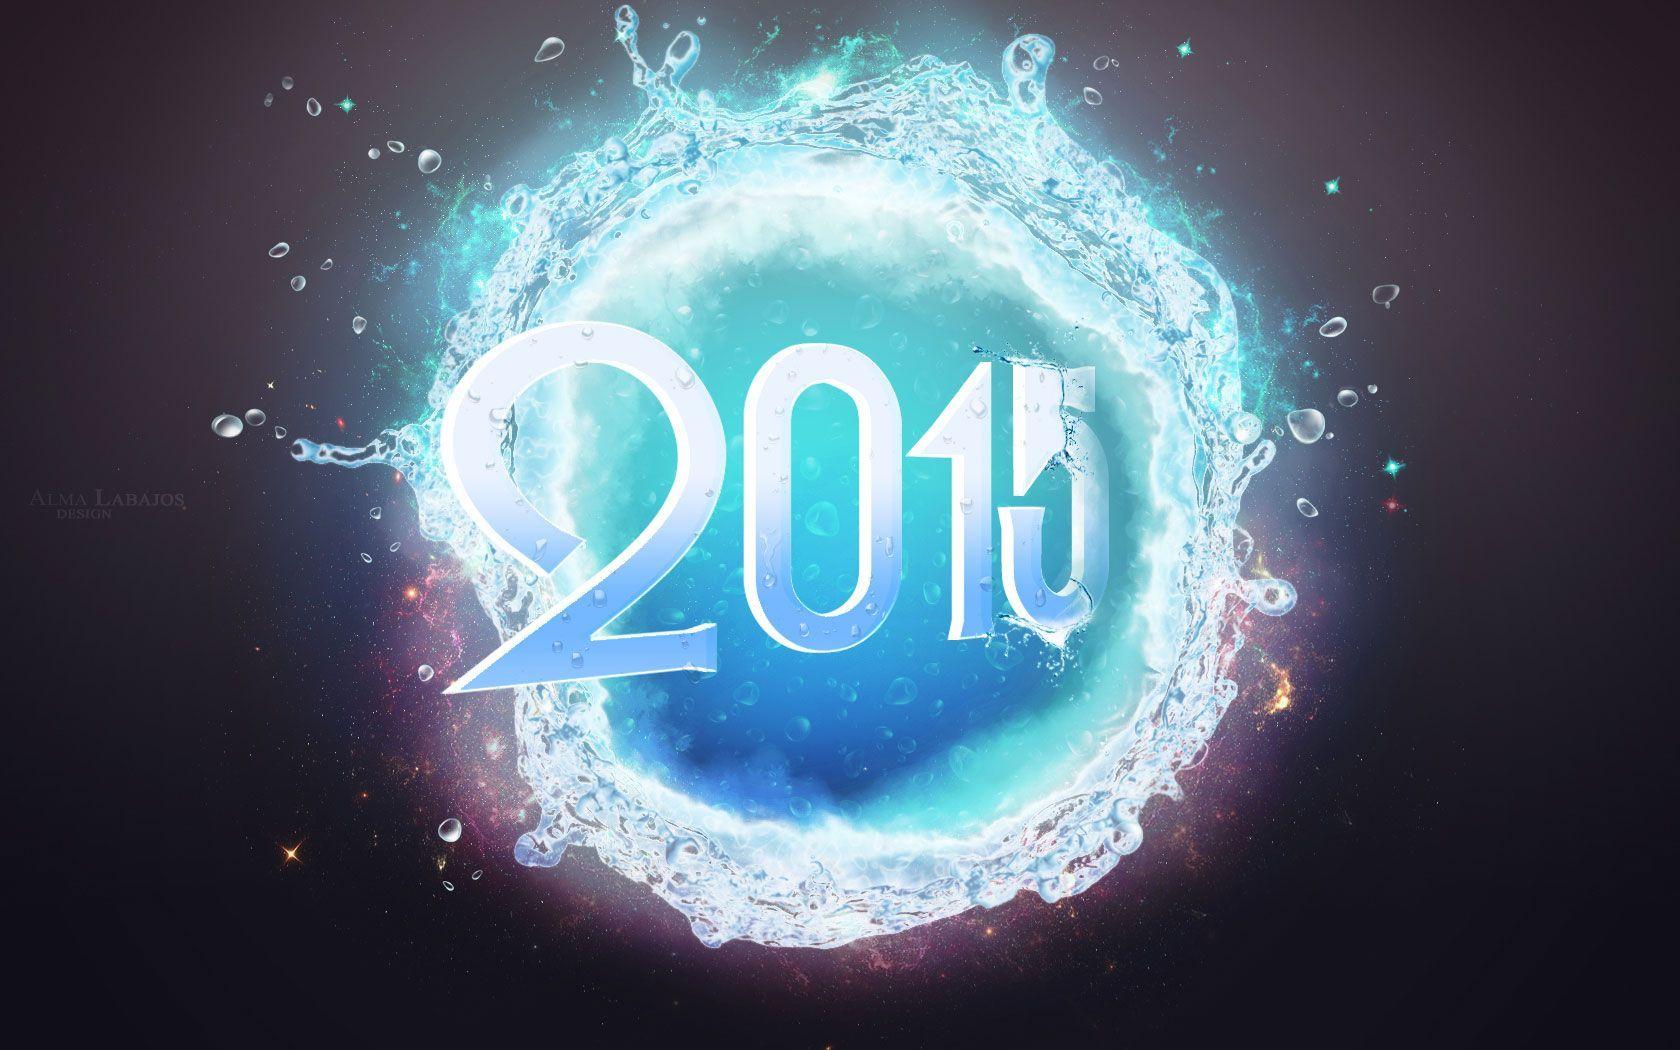 Happy New Year 2015 Wallpaper, Image & Facebook Cover photo